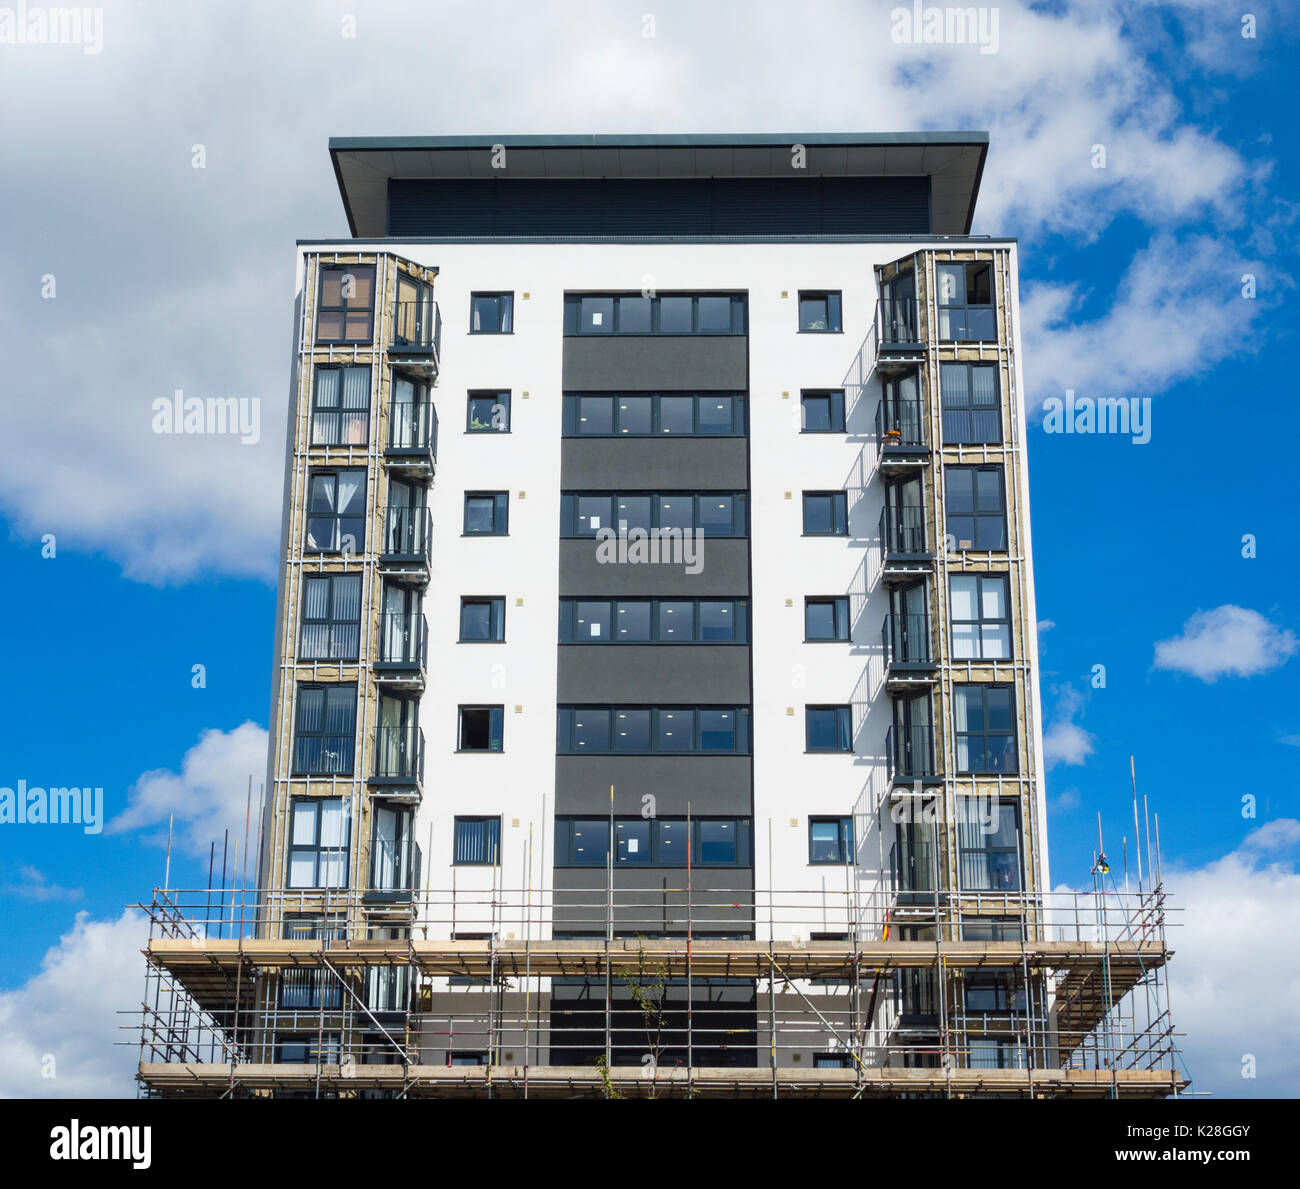 UK: Cladding being removed from tower blocks at Kennedy Gardens in Billingham, north east England. Stock Photo